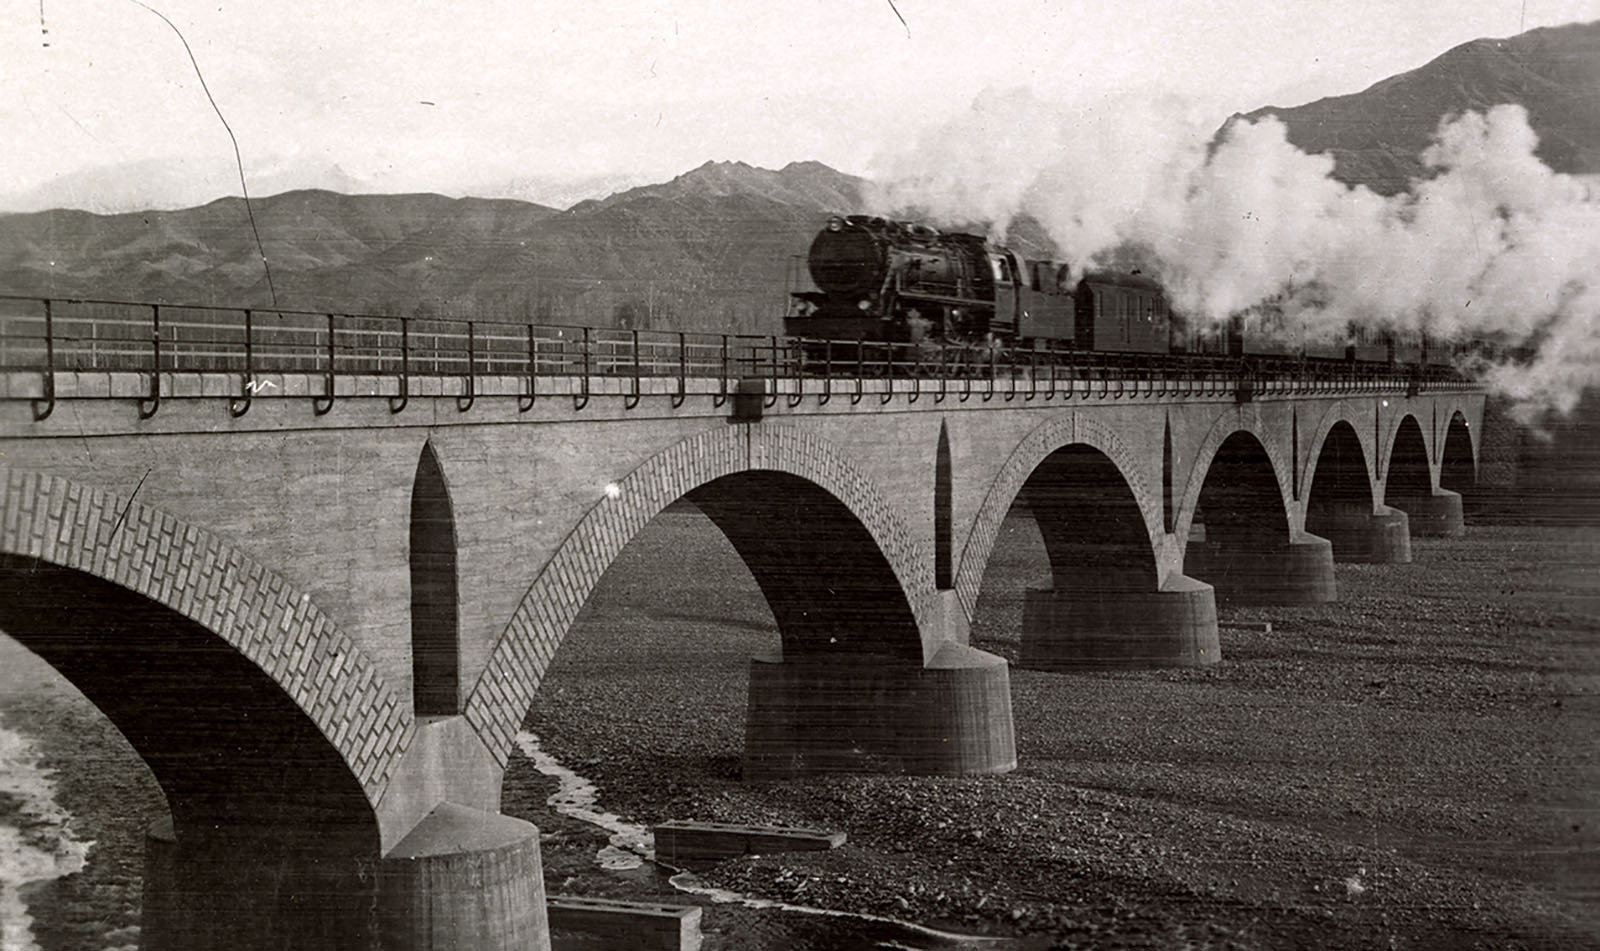 Arched bridge over a river with a steam train crossing atop